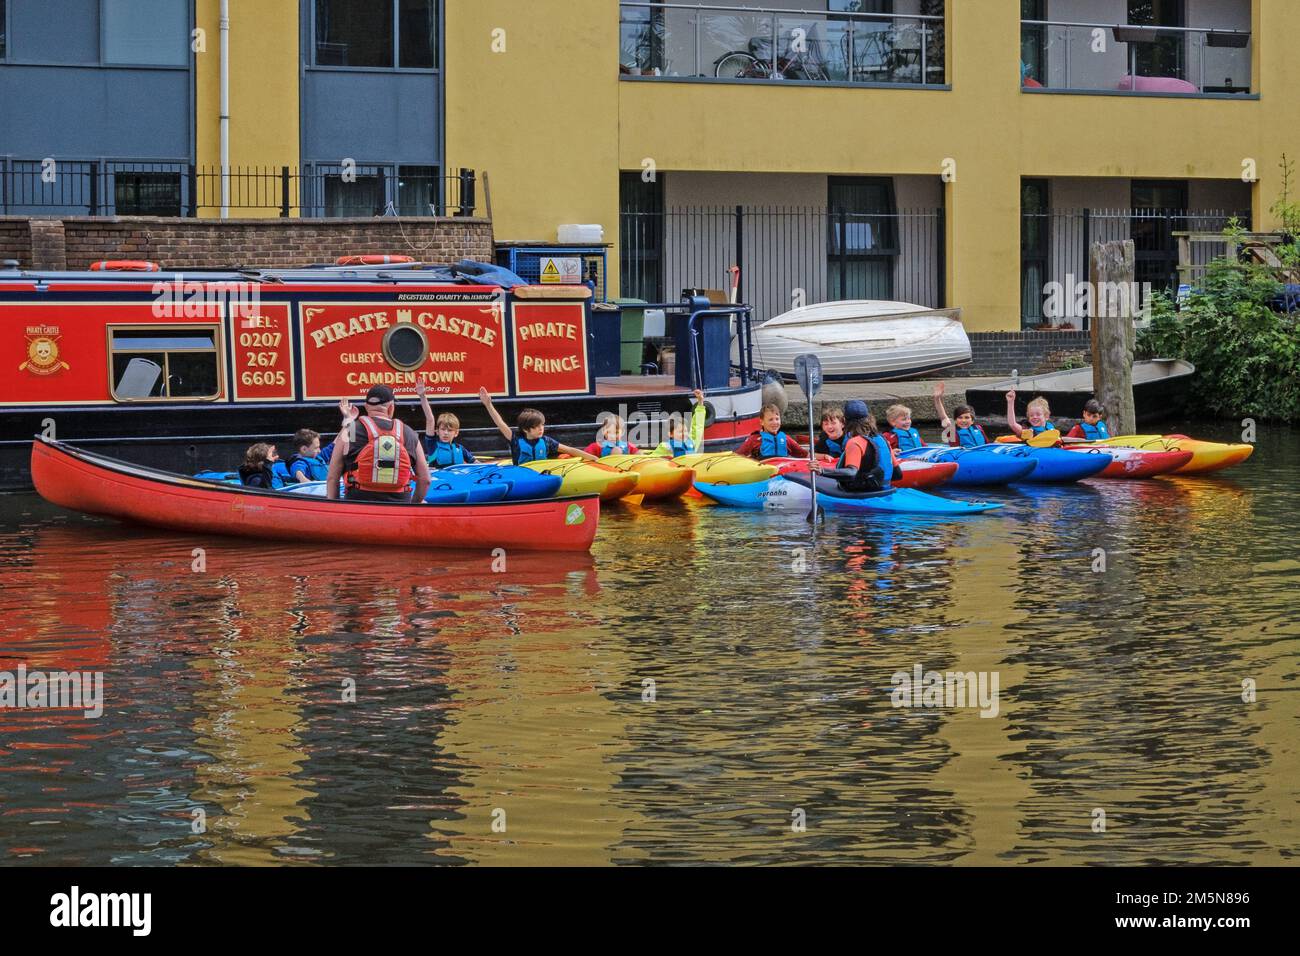 Children enjoying a Pirate Castle paddlesport session on kayaking. Regents Canal at Camden Town, London. Stock Photo